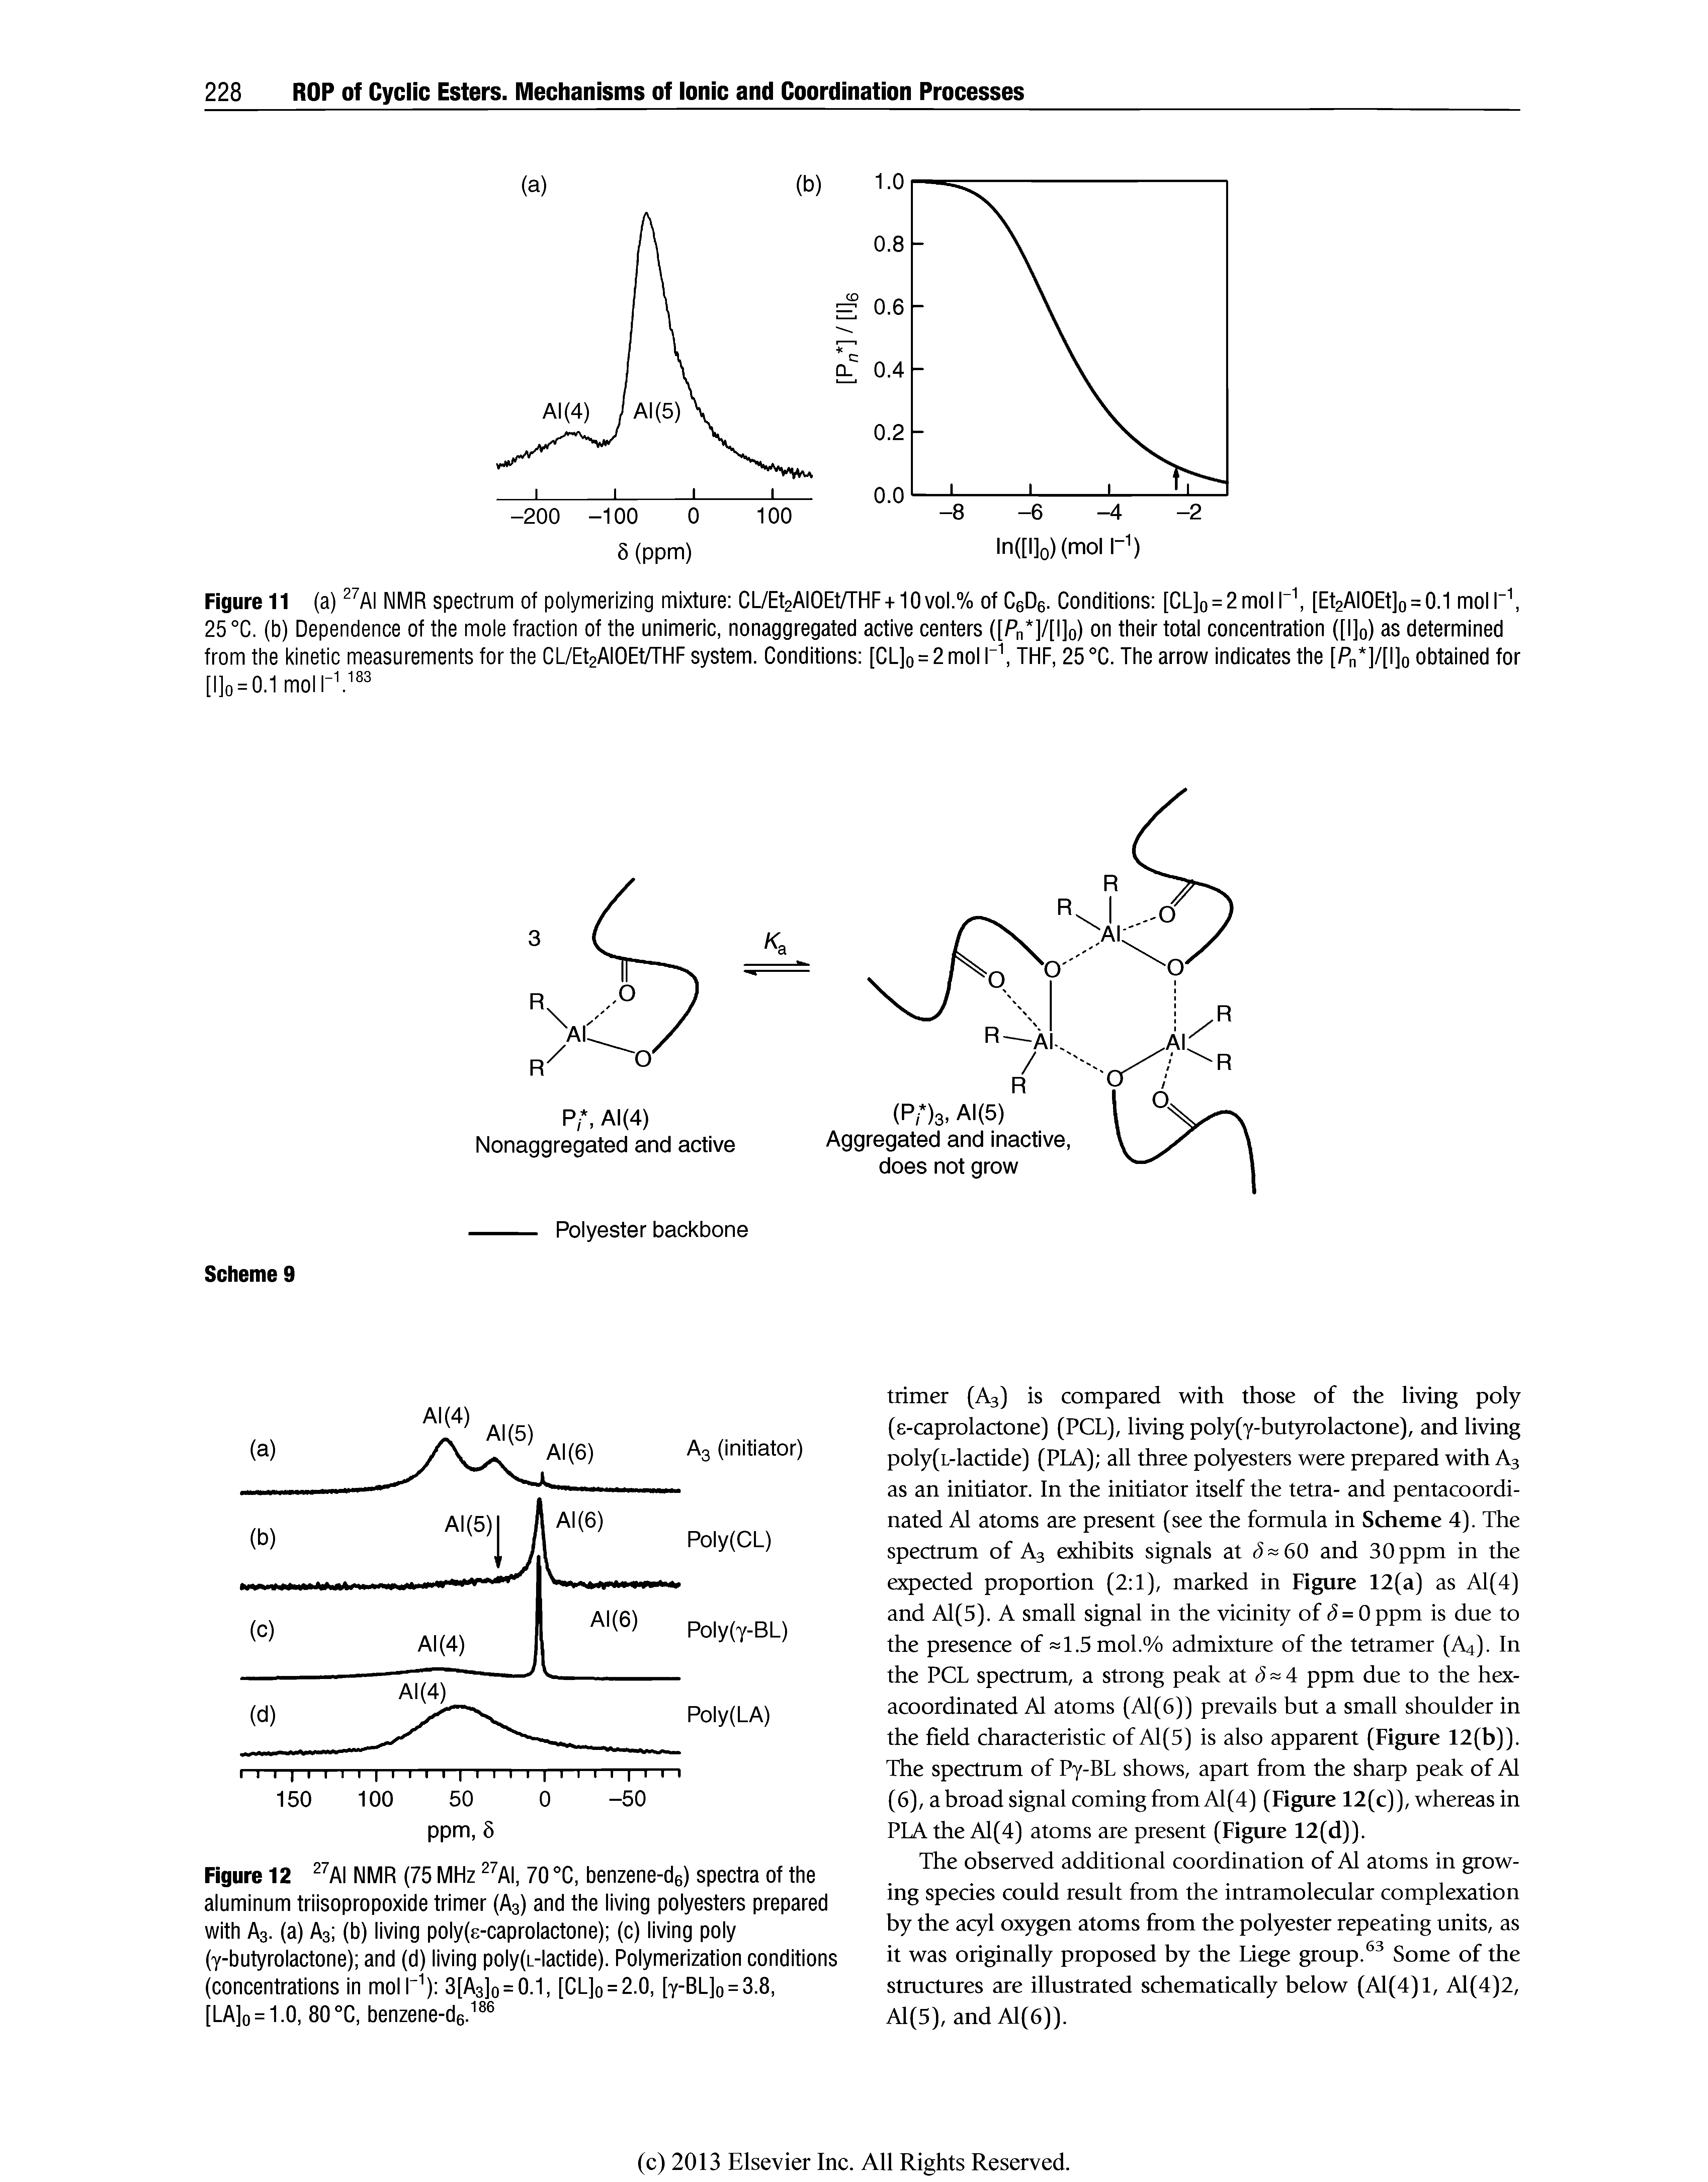 Figure 12 Al NMR (75 MHz Al, 70 X, benzene-dg) spectra of the aluminum triisopropoxide trimer (A3) and the living polyesters prepared with A3, (a) A3 (b) living poly(8-caprolactone) (c) living poly (y-butyrolactone) and (d) living poly(L-lactide). Polymerization conditions (concentrations in molM) 3[A3]q = 0.1, [CL]o = 2.0, [y-BL]o = 3.8,...